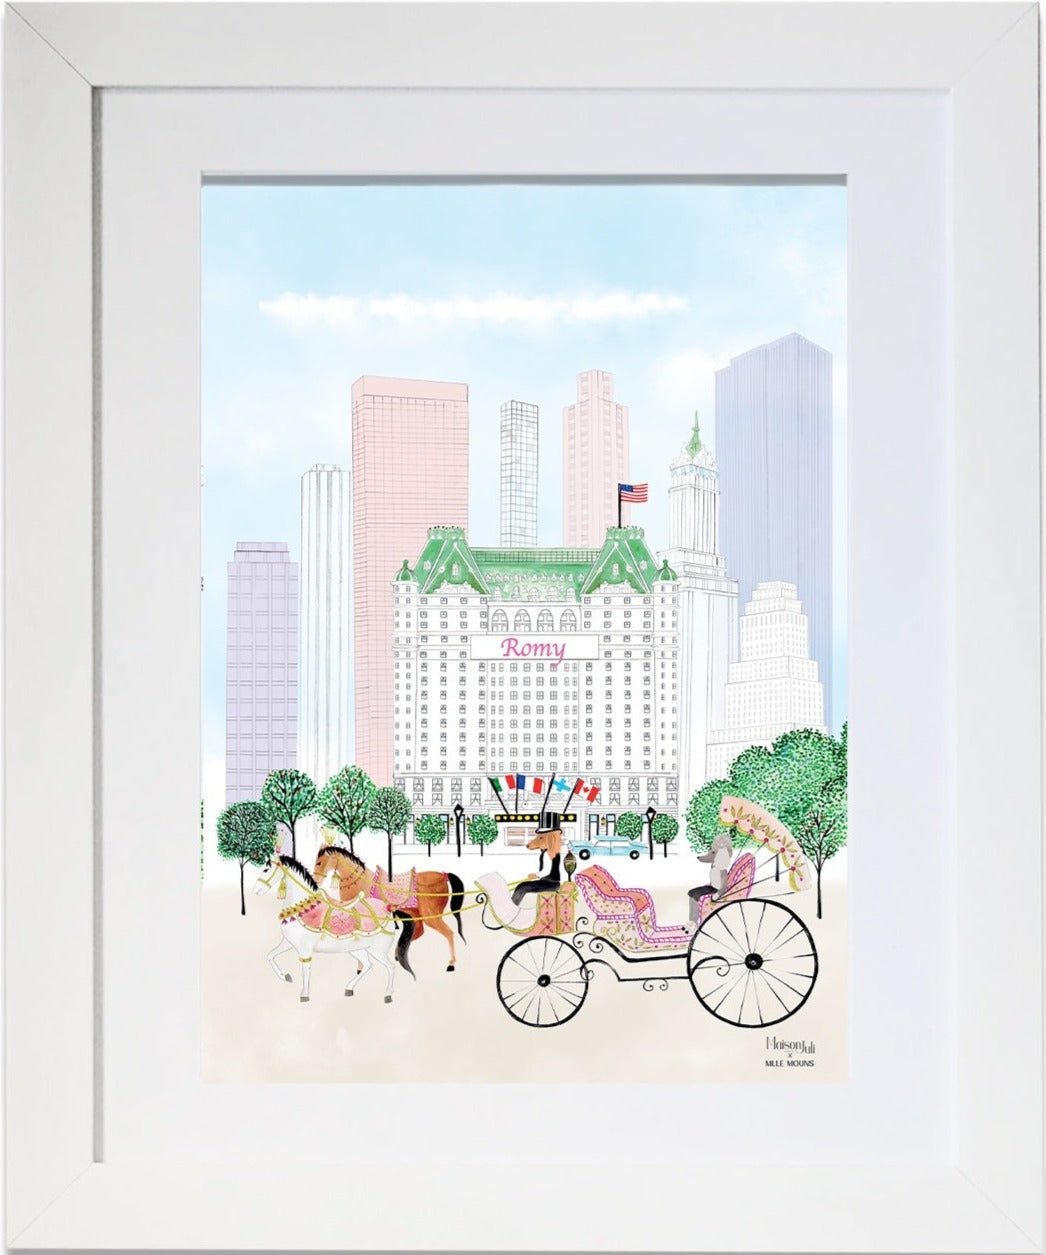 The carriage of Central Park for girls